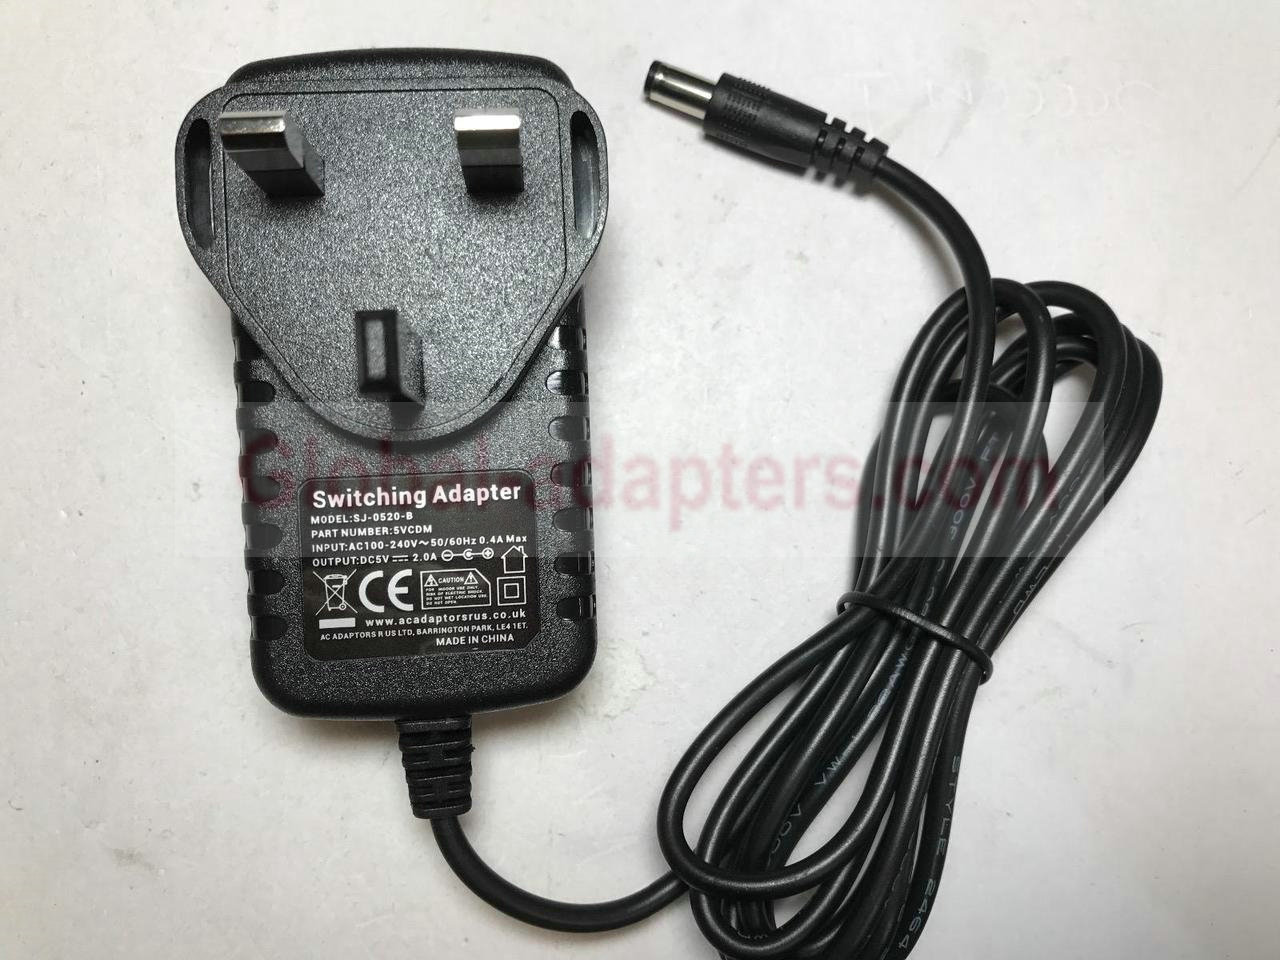 New DC5V 2A SJ-0520-B 5VCDM Power Supply Switching Adapter - Click Image to Close